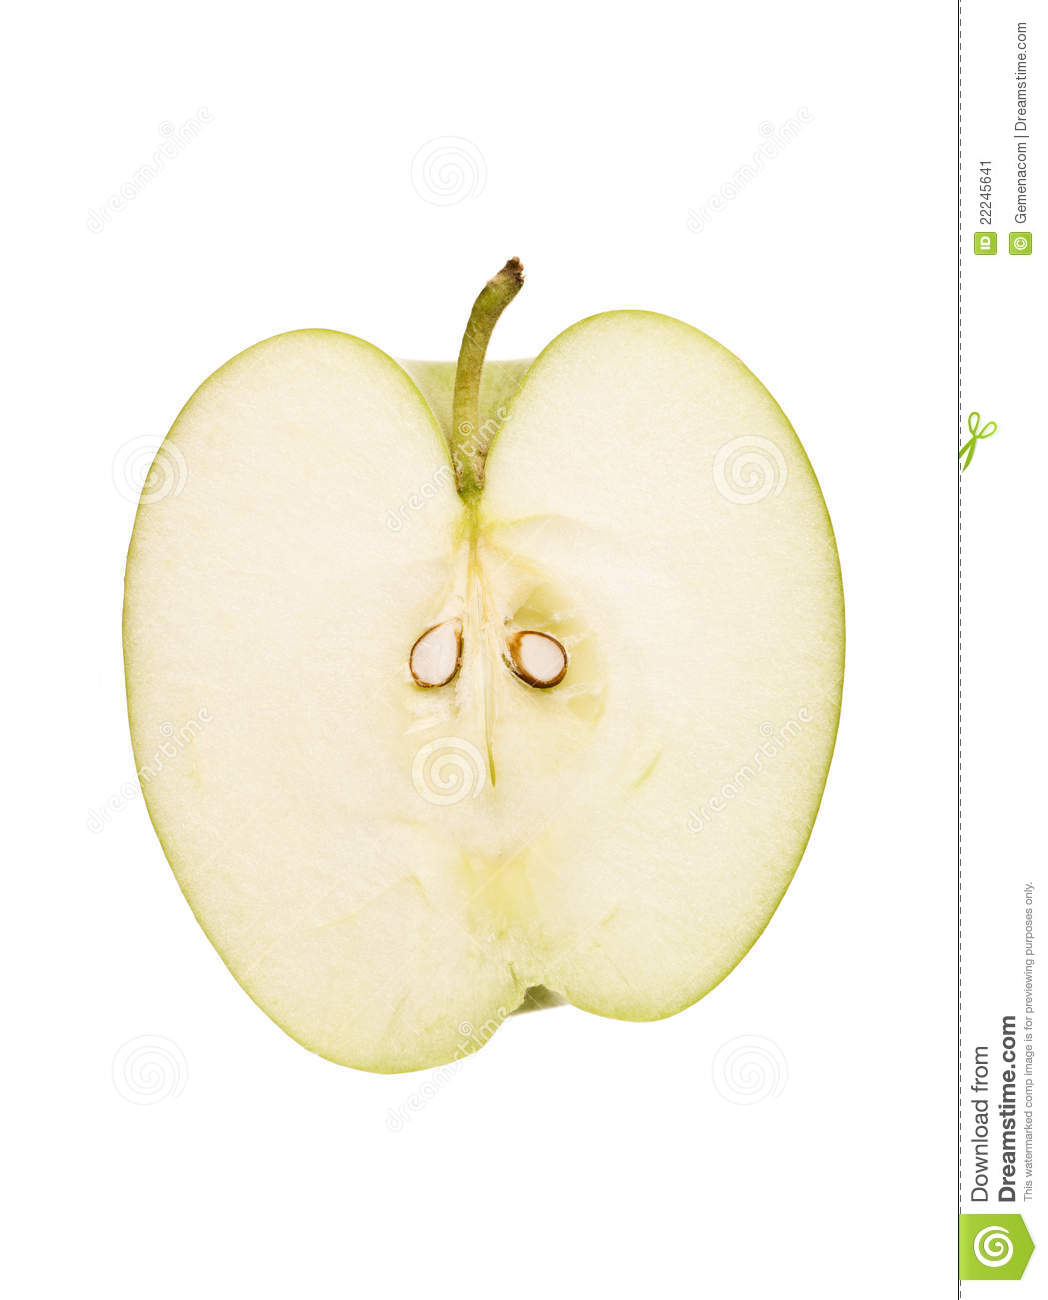 Apple Cut In Half Clipart Apple Cut In Half Isolated On